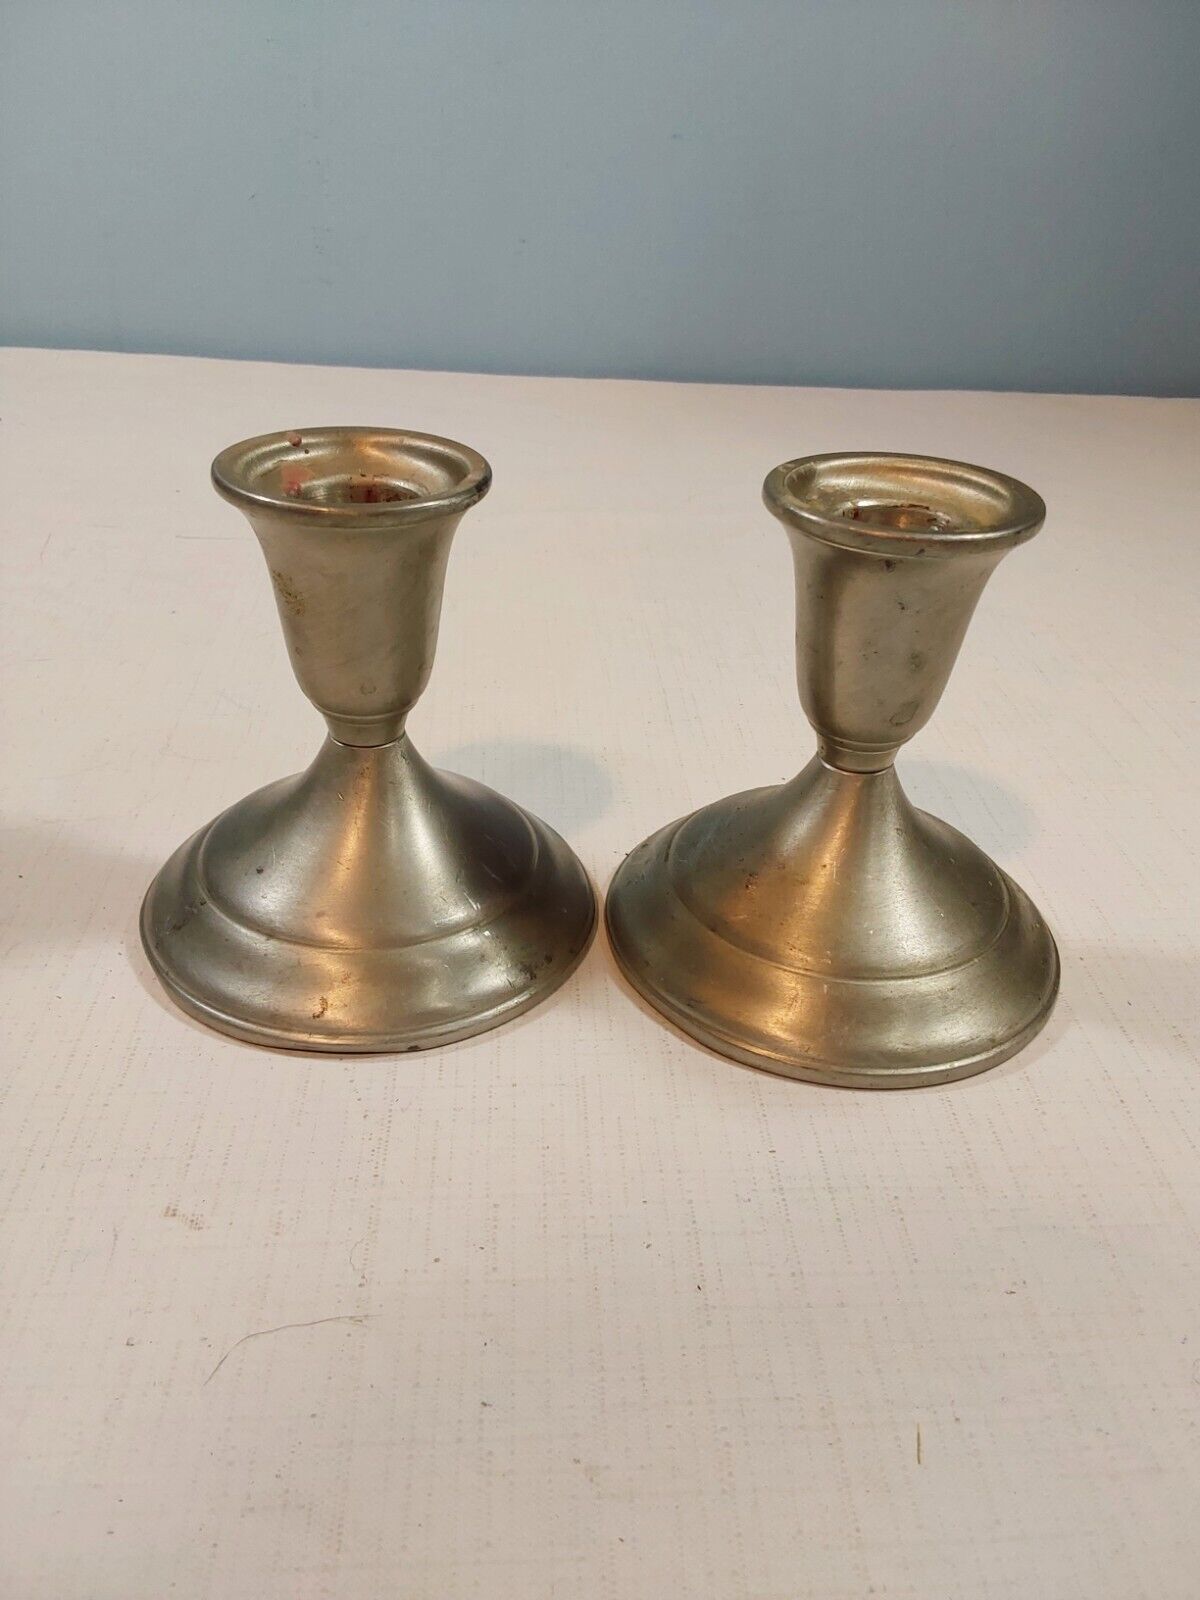 Lot of 2 Vintage Poole Pewter Candlestick Holders